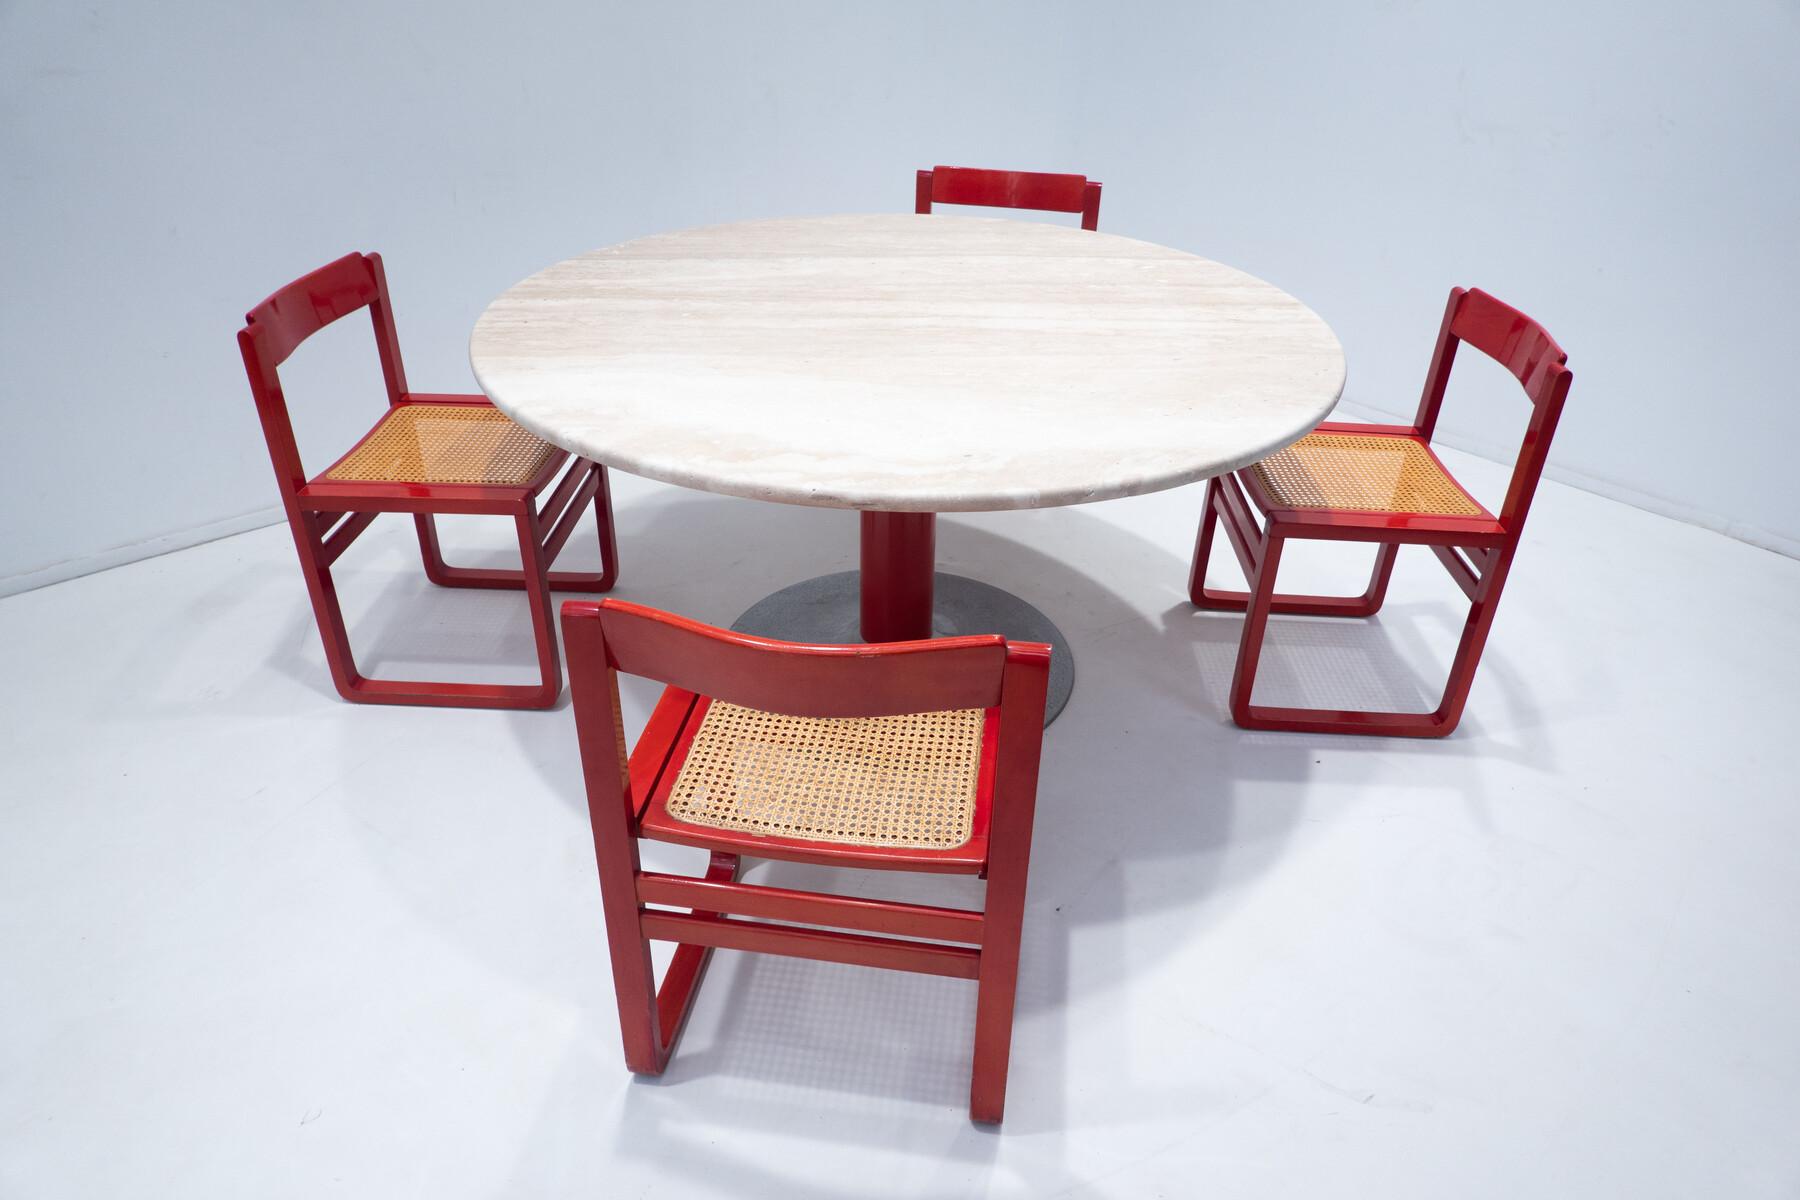 Italian Mid-Century Modern Dining Table, Travertine and Metal, Italy, 1960s, 2 Available For Sale